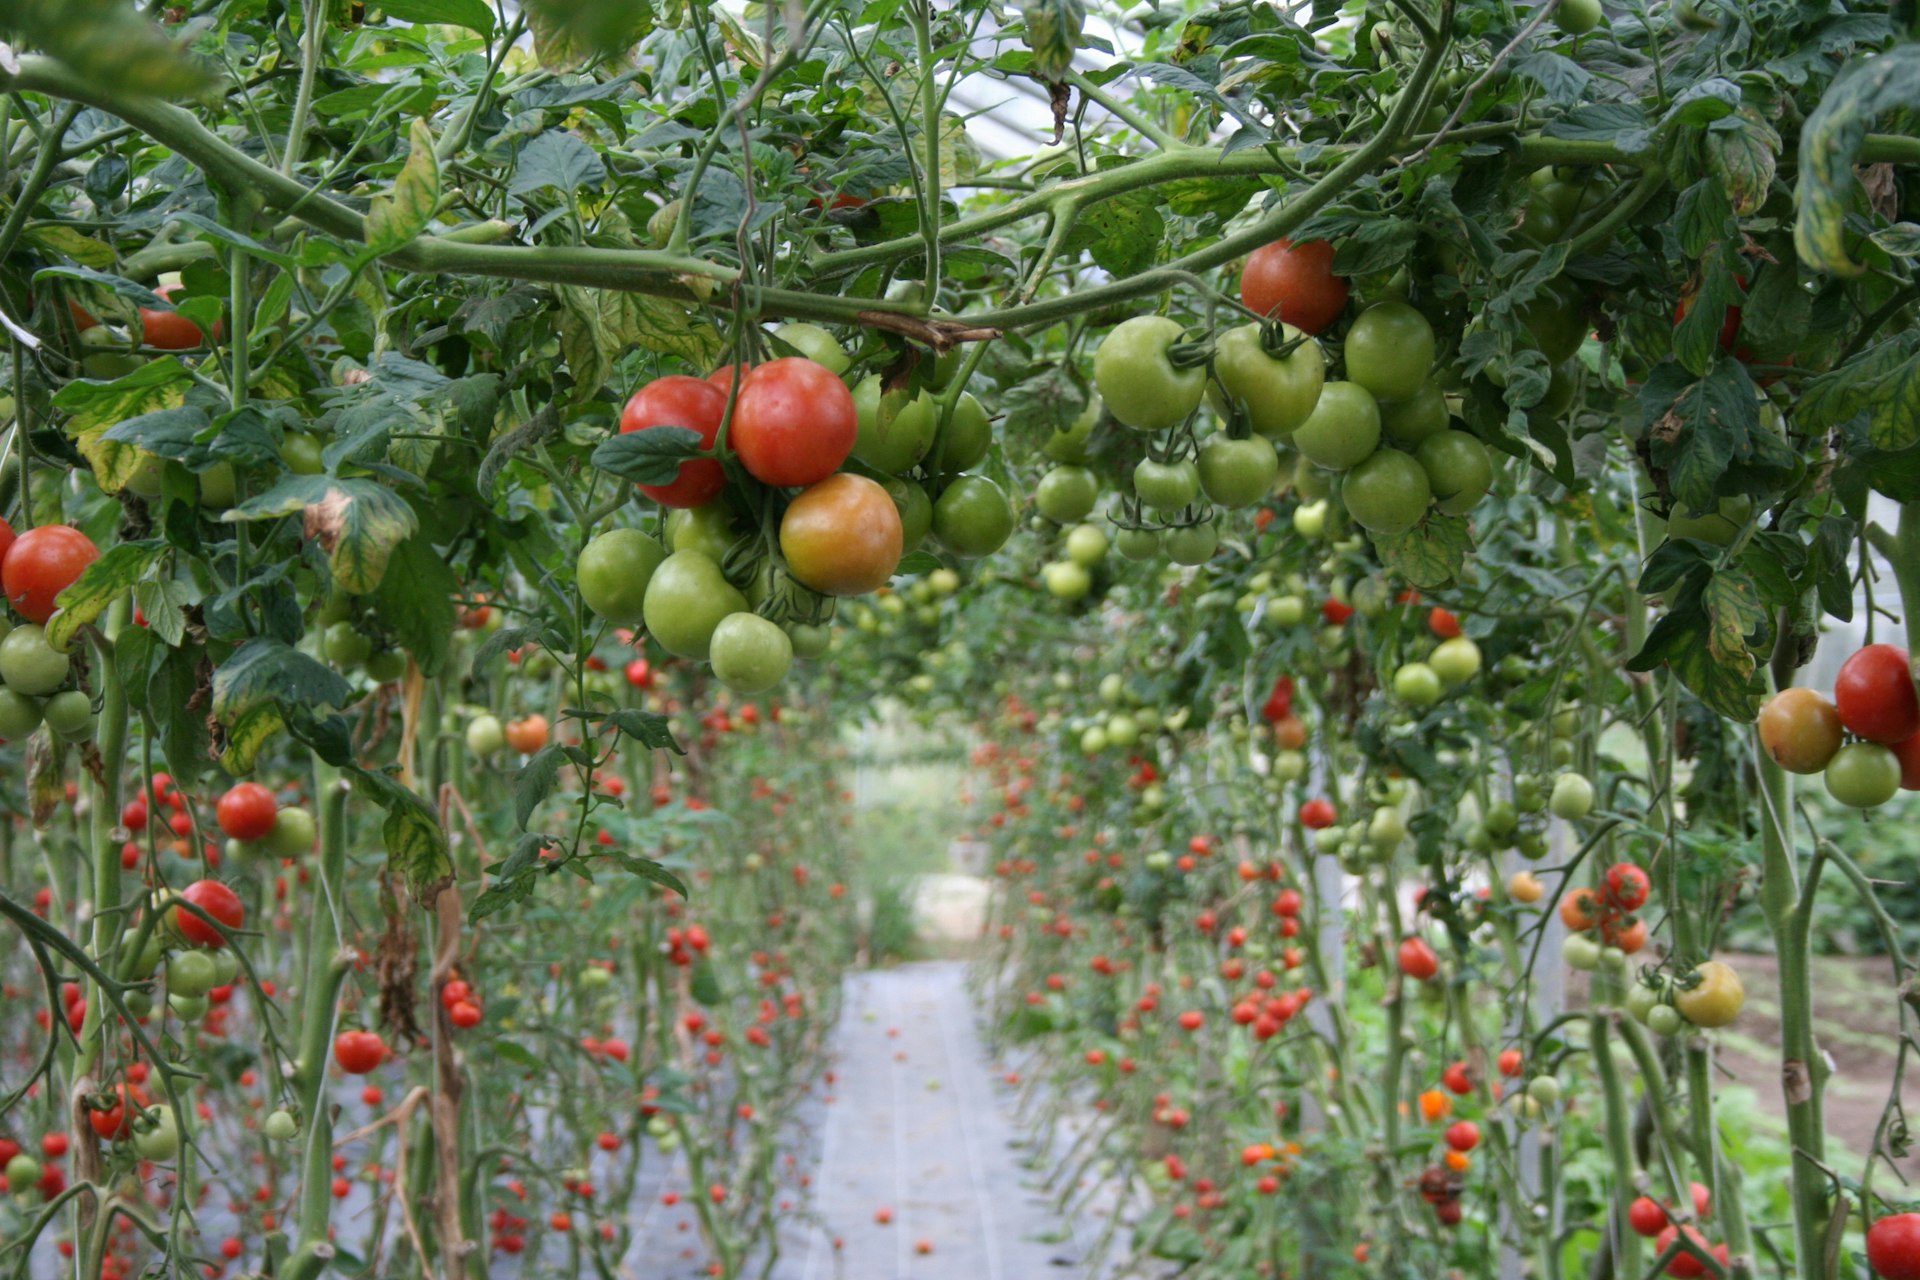 Tomatoes growing at the renowned Ballymaloe Cookery School. Image by MCT / Getty